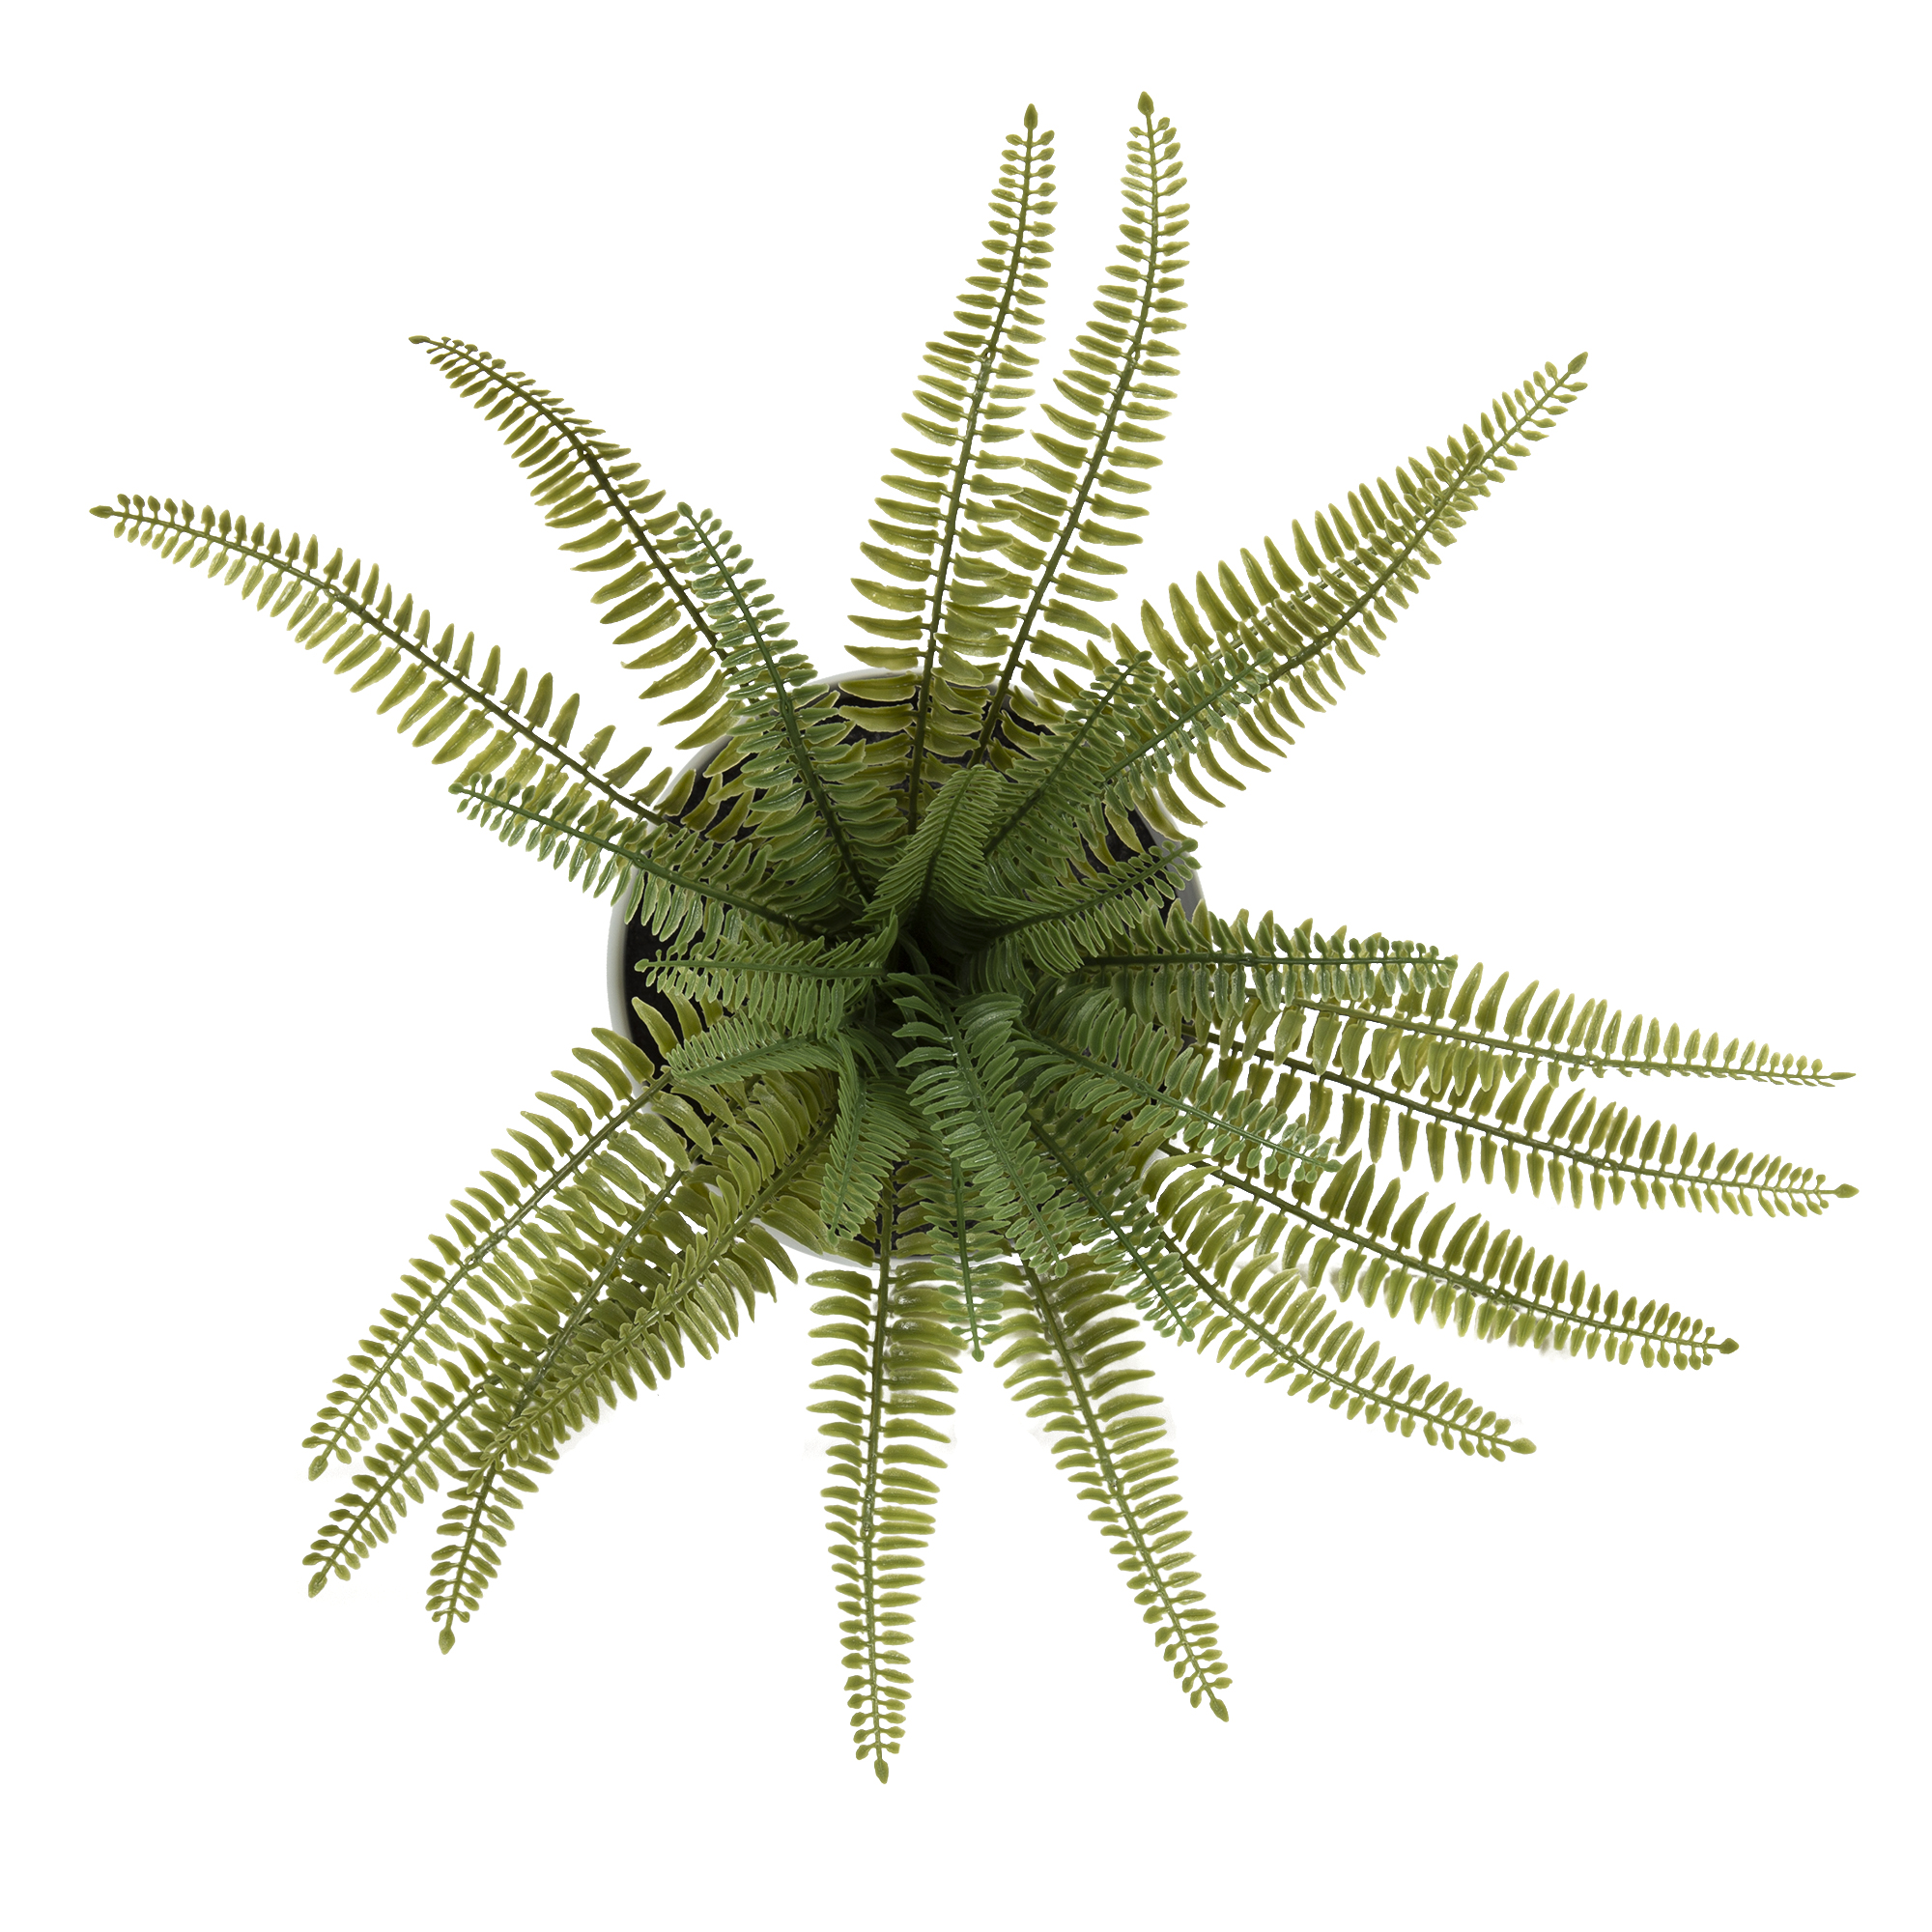 9.25" Artificial Fern Plant in Tan and White Ceramic Pot by Better Homes & Gardens - image 3 of 9